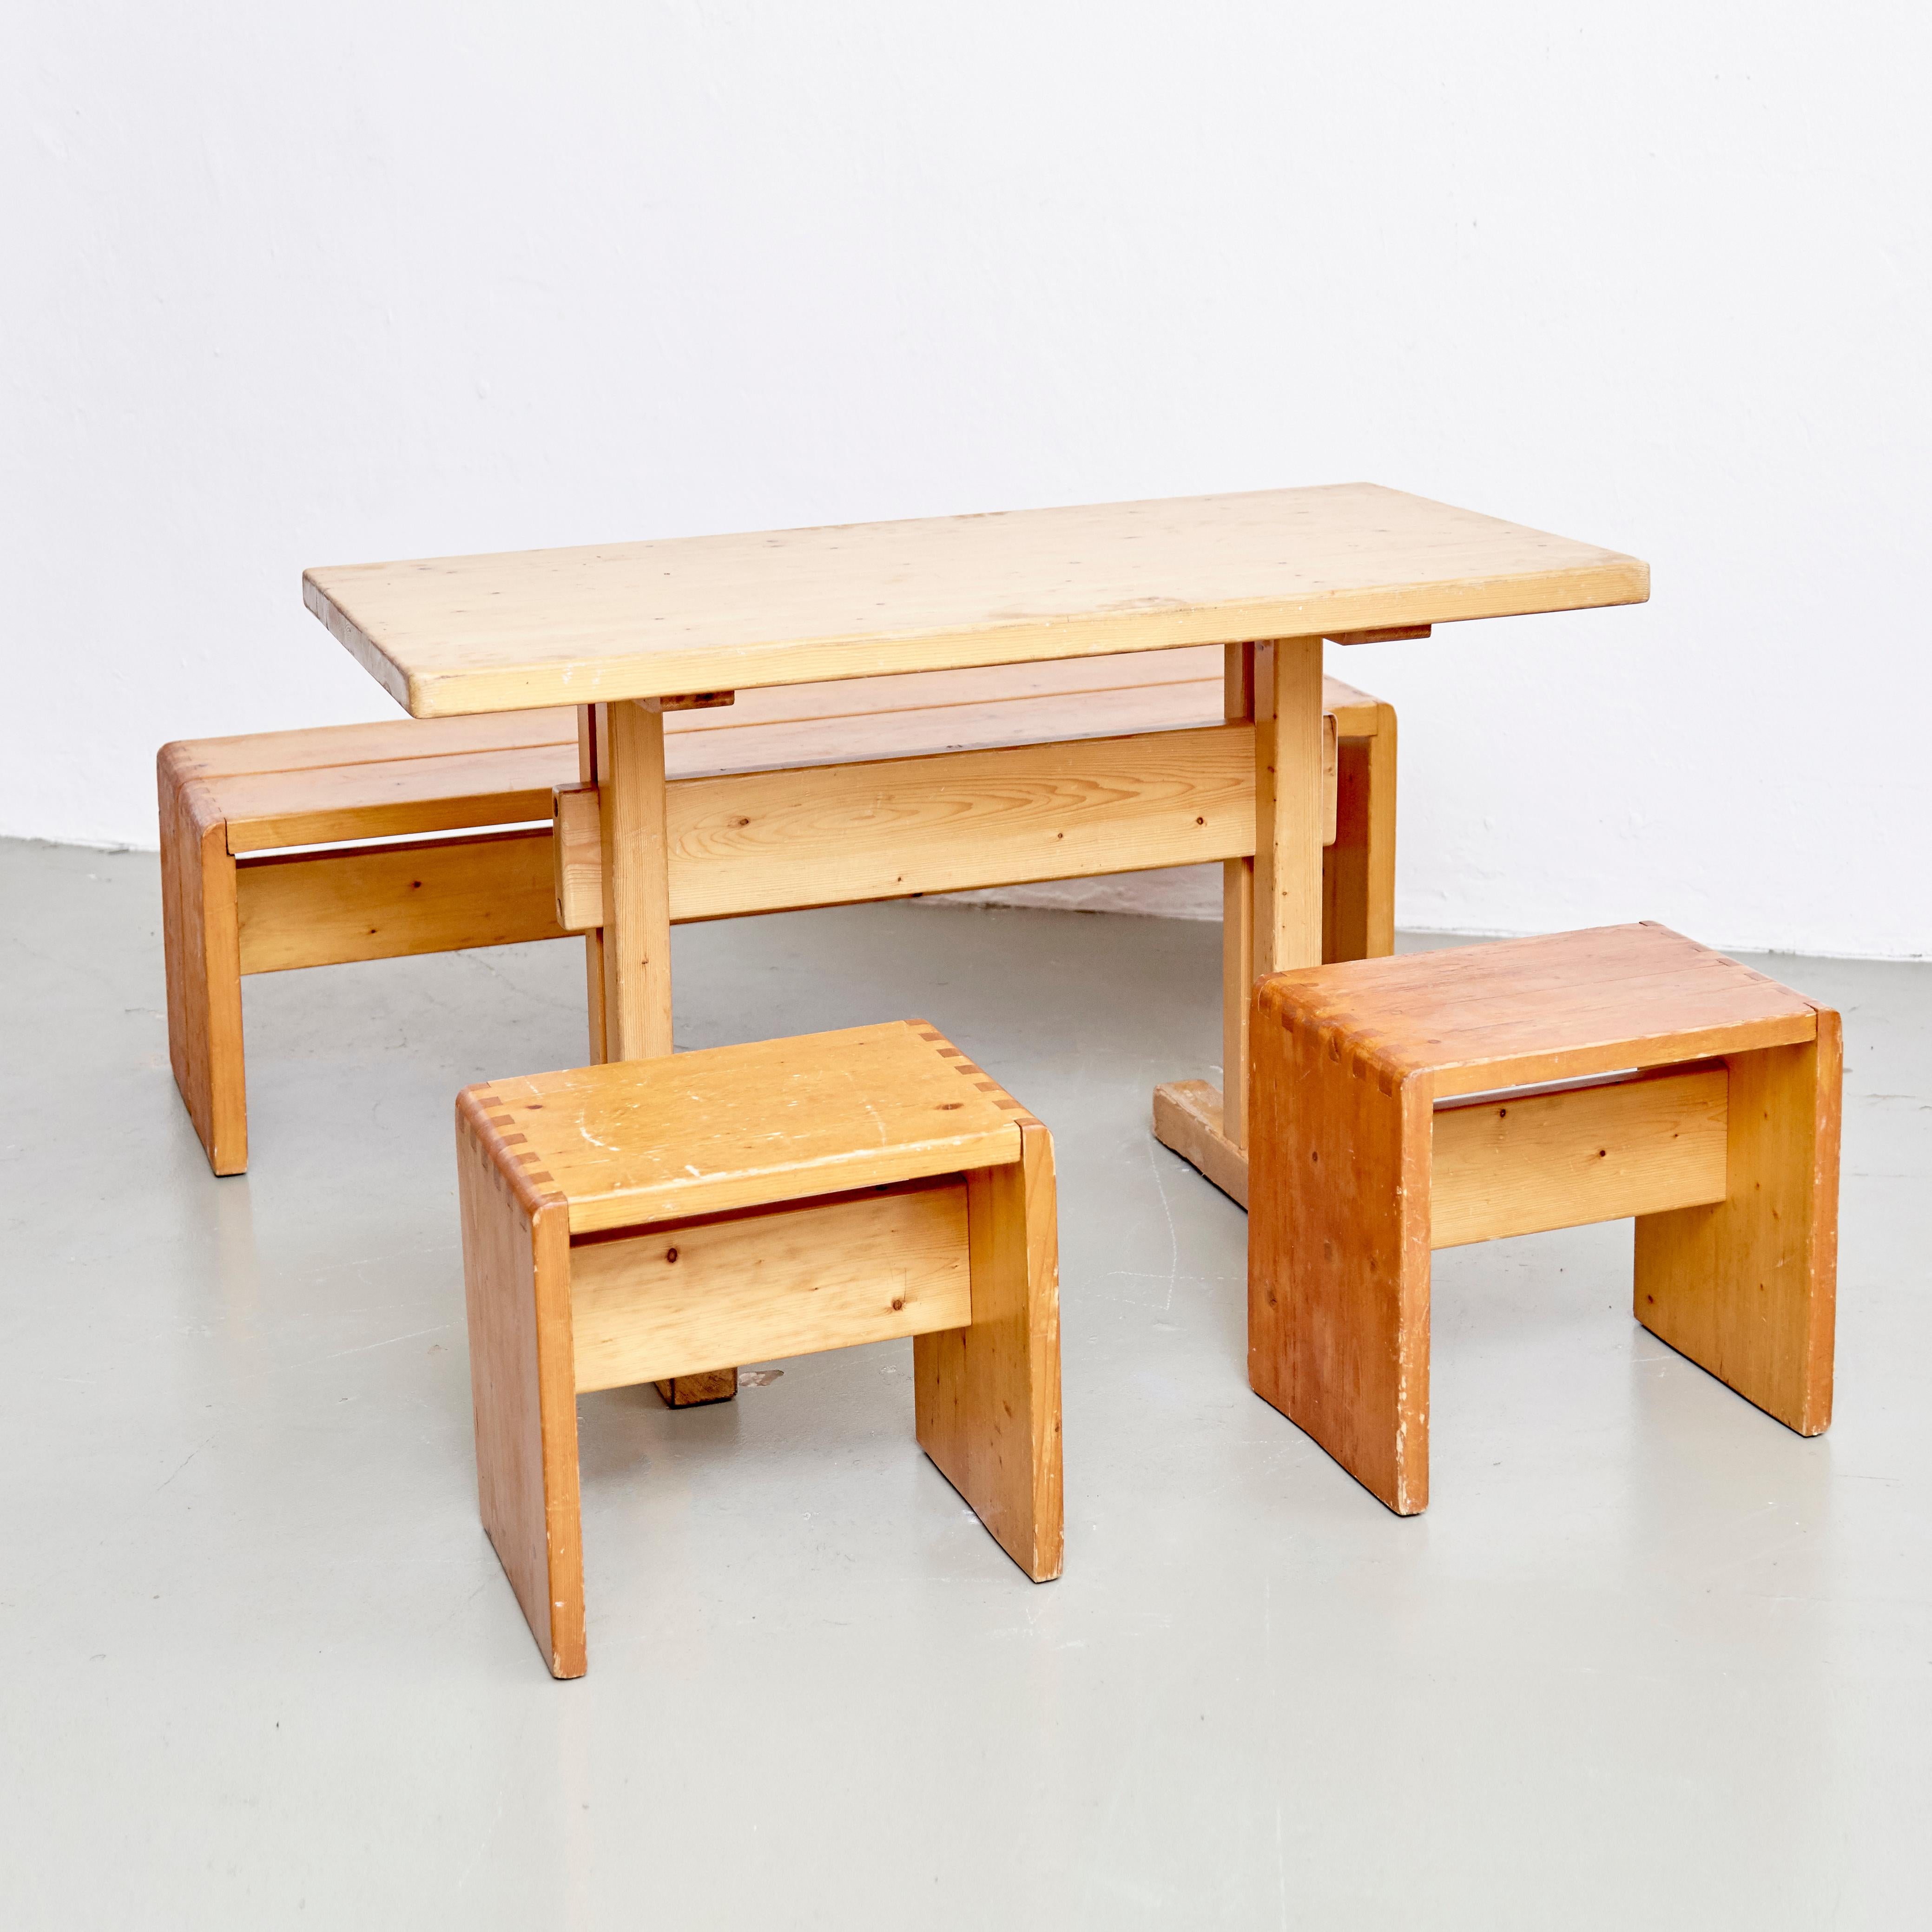 Set of table, stools and bench designed by Charlotte Perriand for Les Arcs ski resort, circa 1960, manufactured in France.

Pinewood.

In original condition, with minor wear consistent with age and use, preserving a beautiful